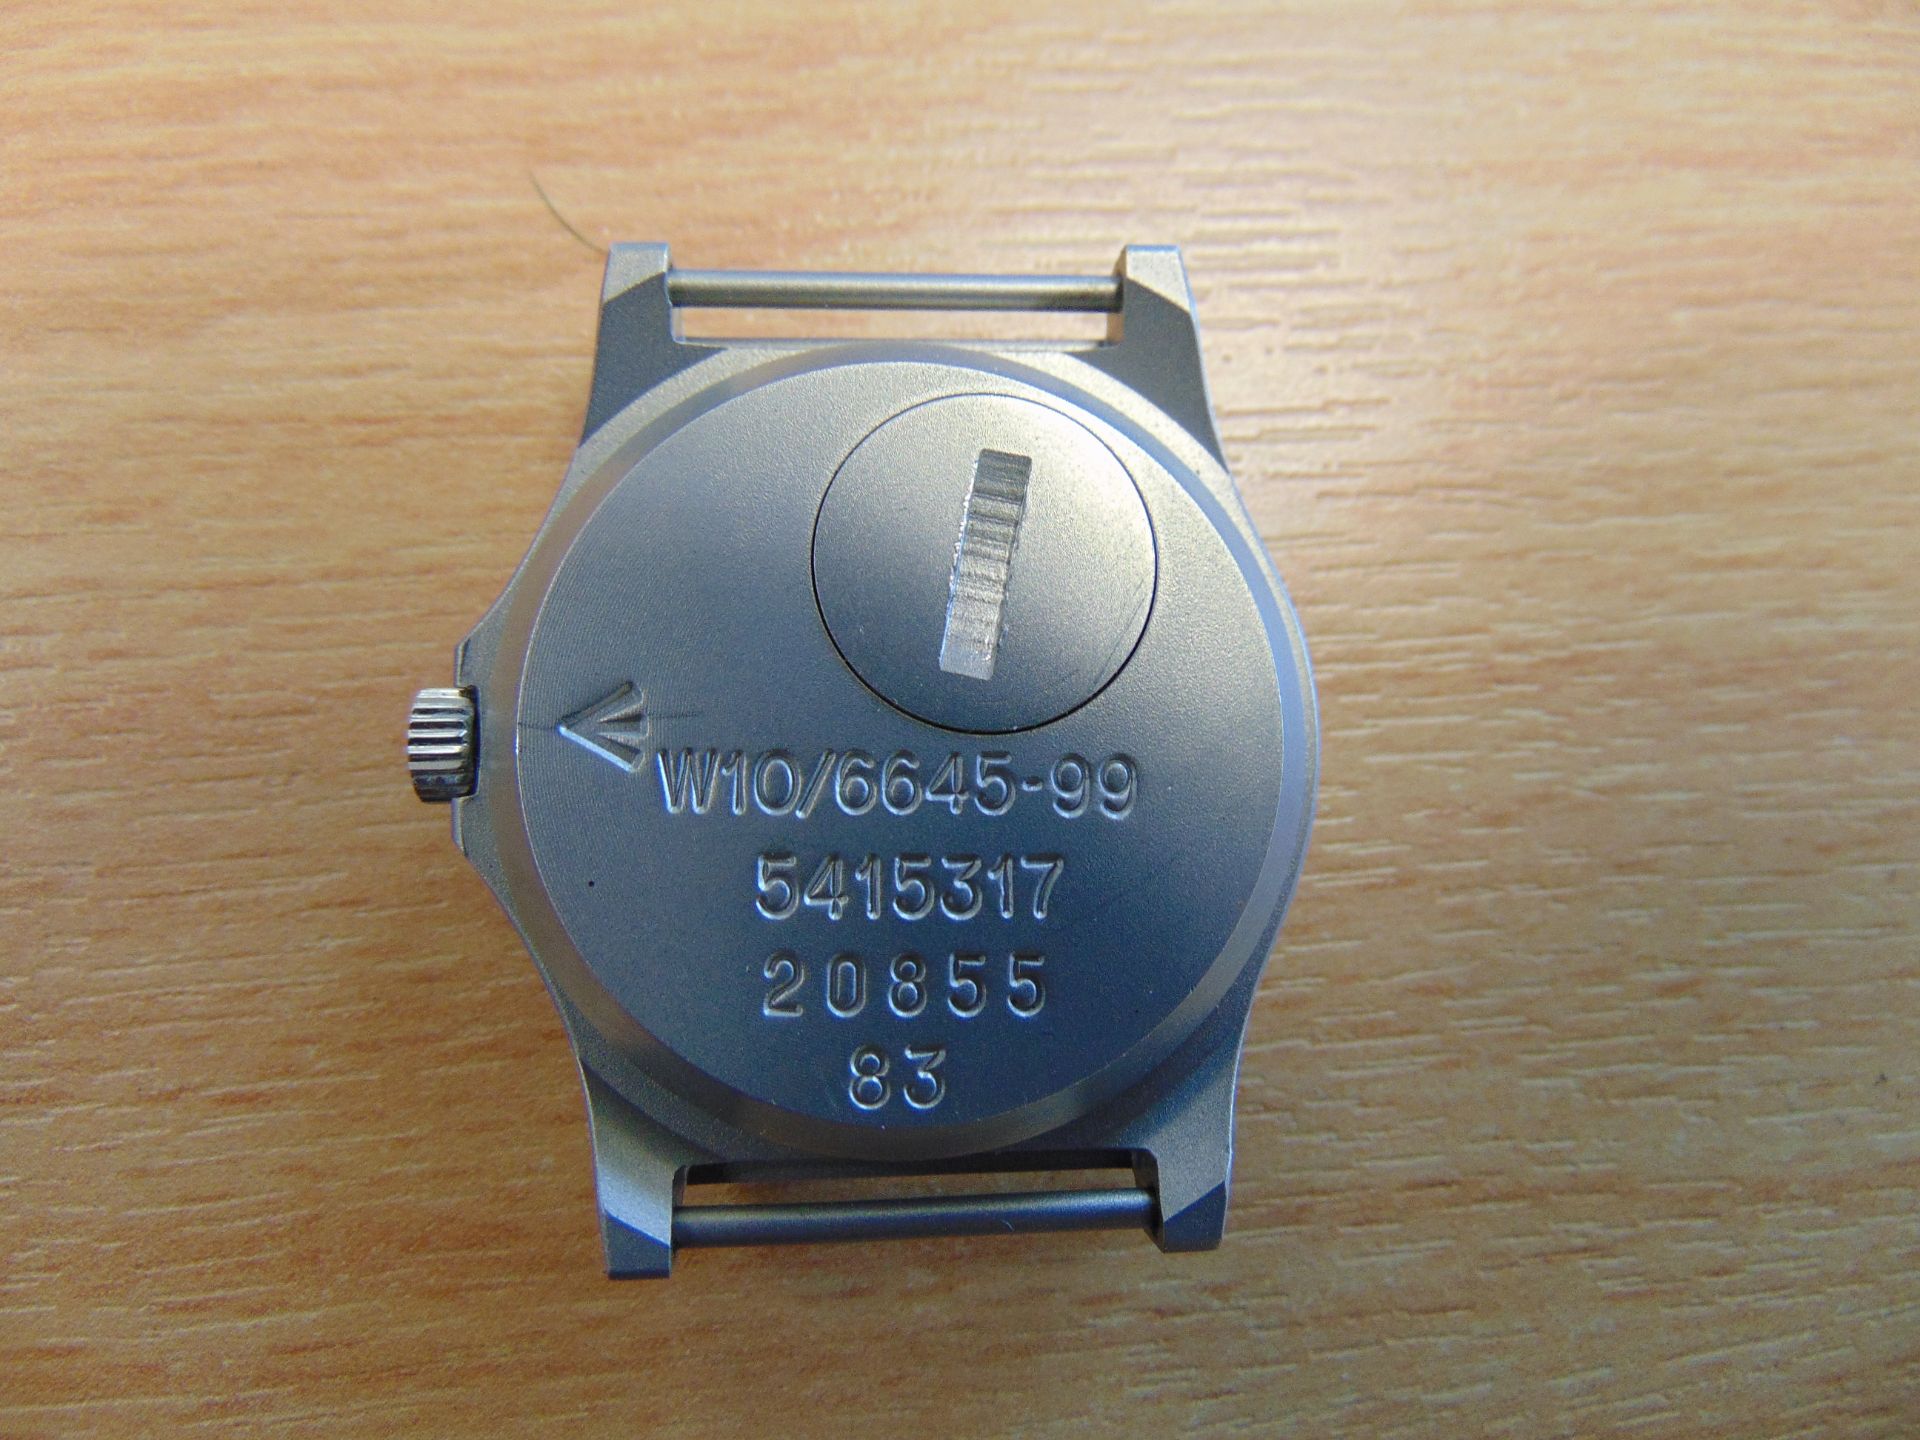 V Rare Unissued CWC (Cabot Watch Co Switzerland) British Army W10 Service Watch Dated 1983 - Image 2 of 6